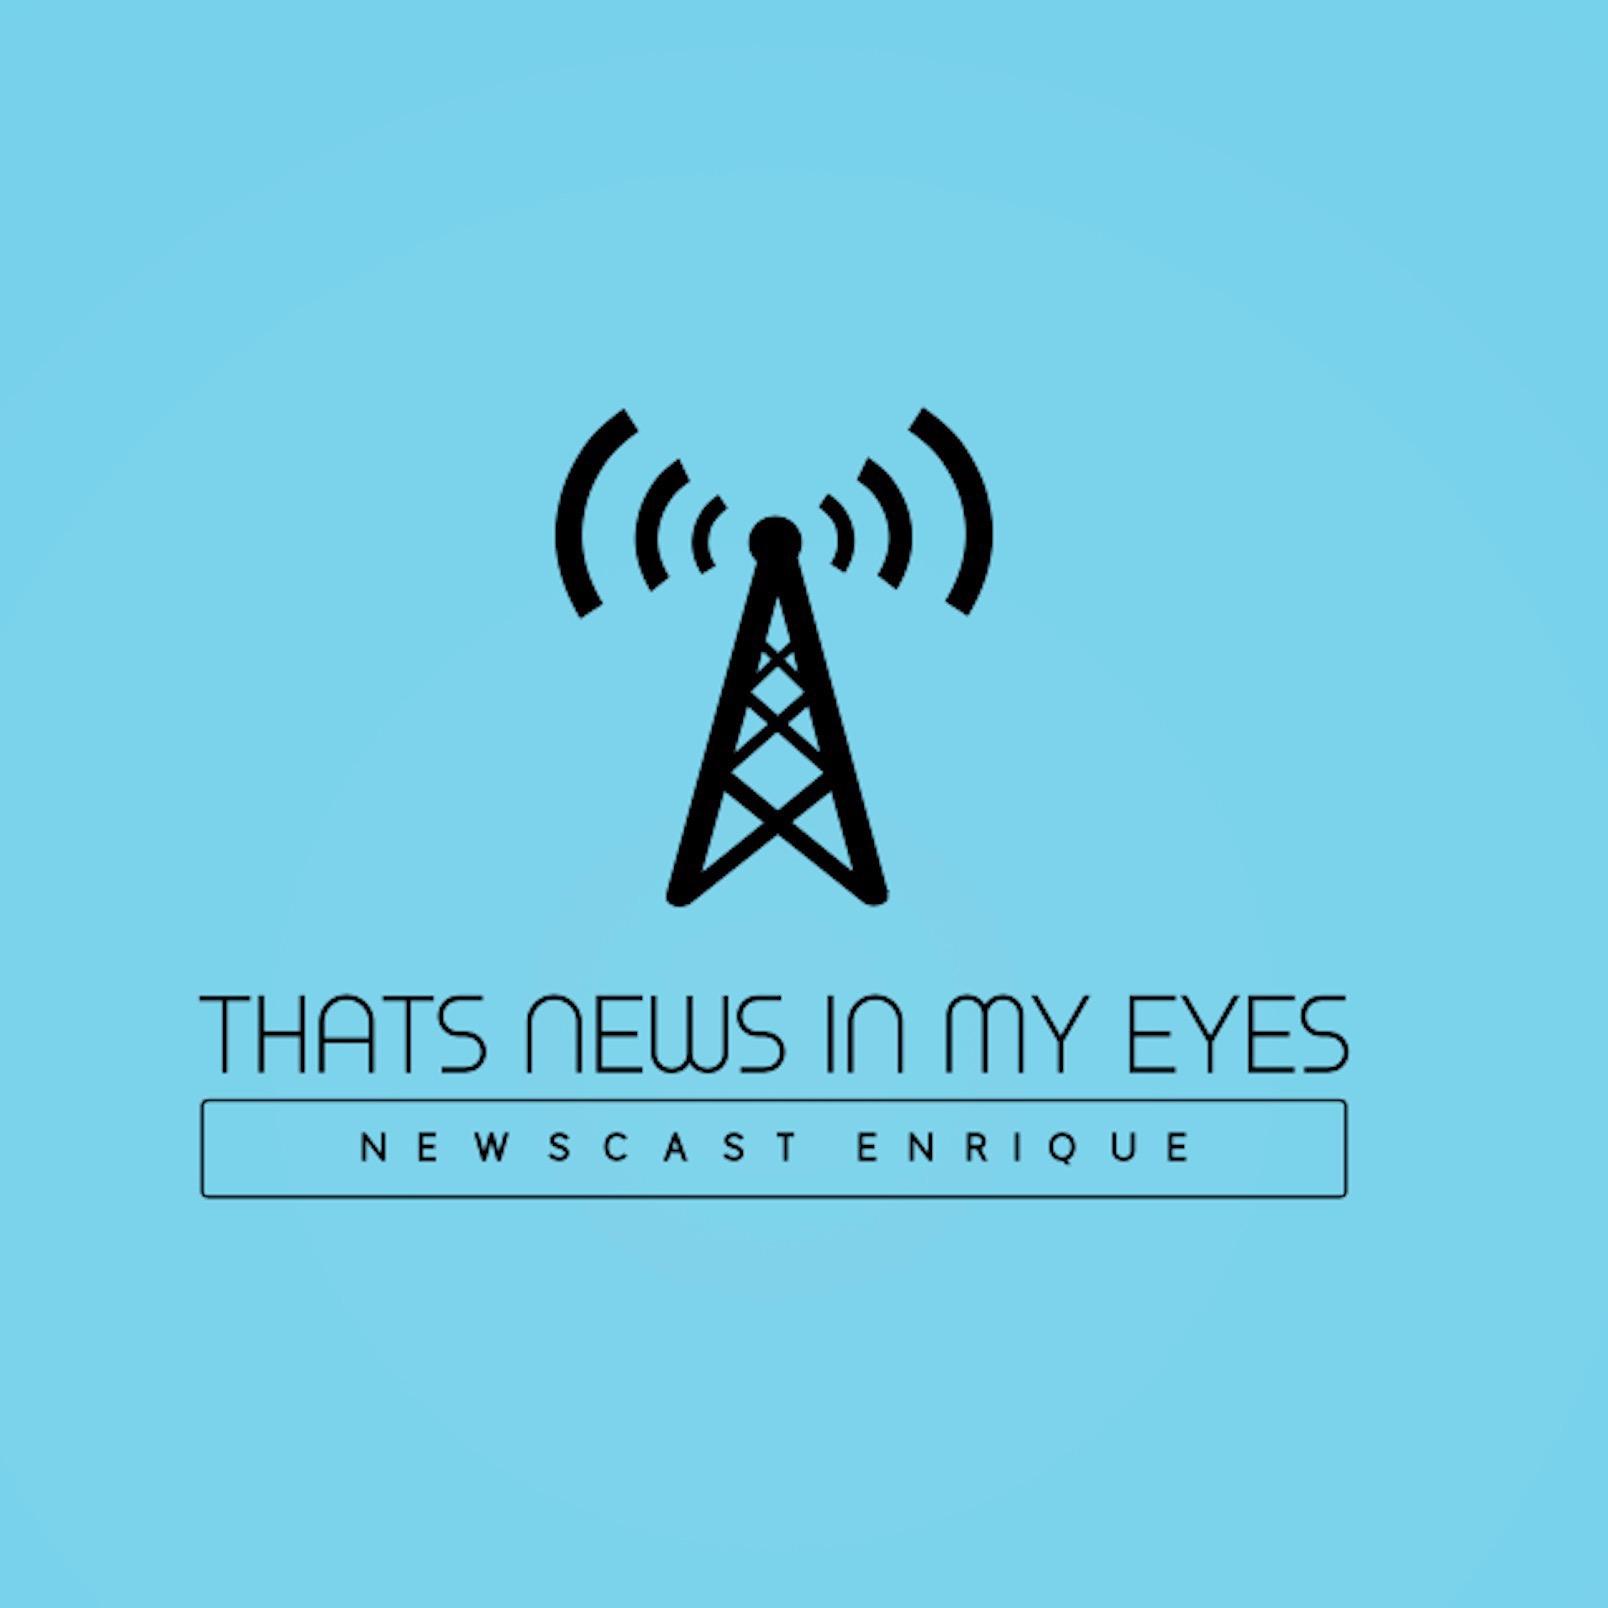 That's News In My Eyes NewsCast